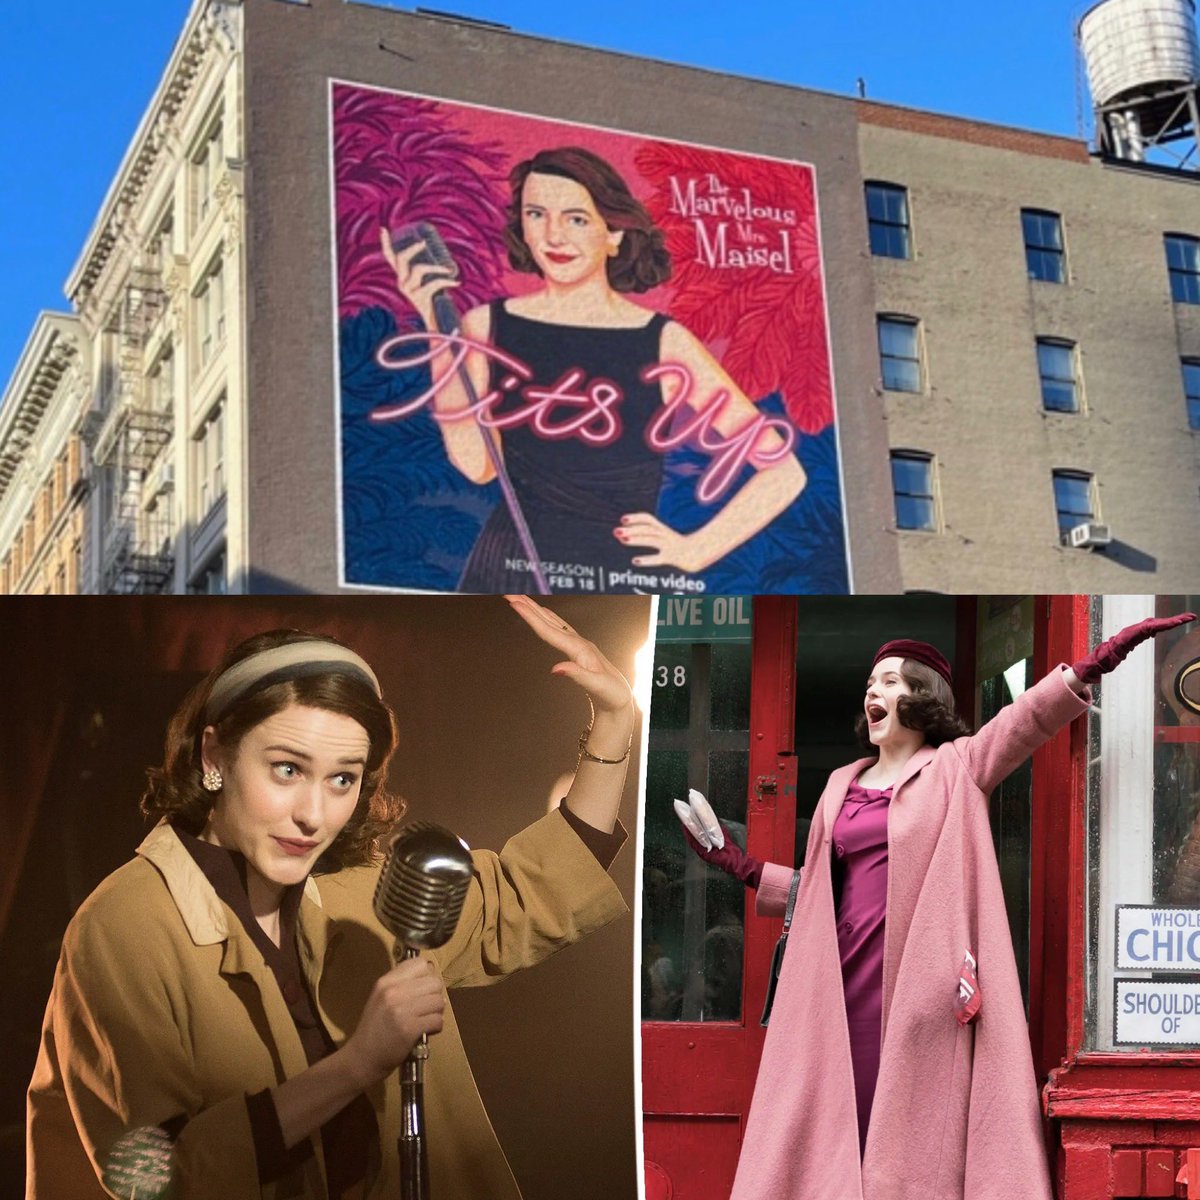 Have you seen the finale of the Marvelous Mrs. Maisel, sniff? Tits up! @MaiselTV #titsup #onwednesdayswewearpink